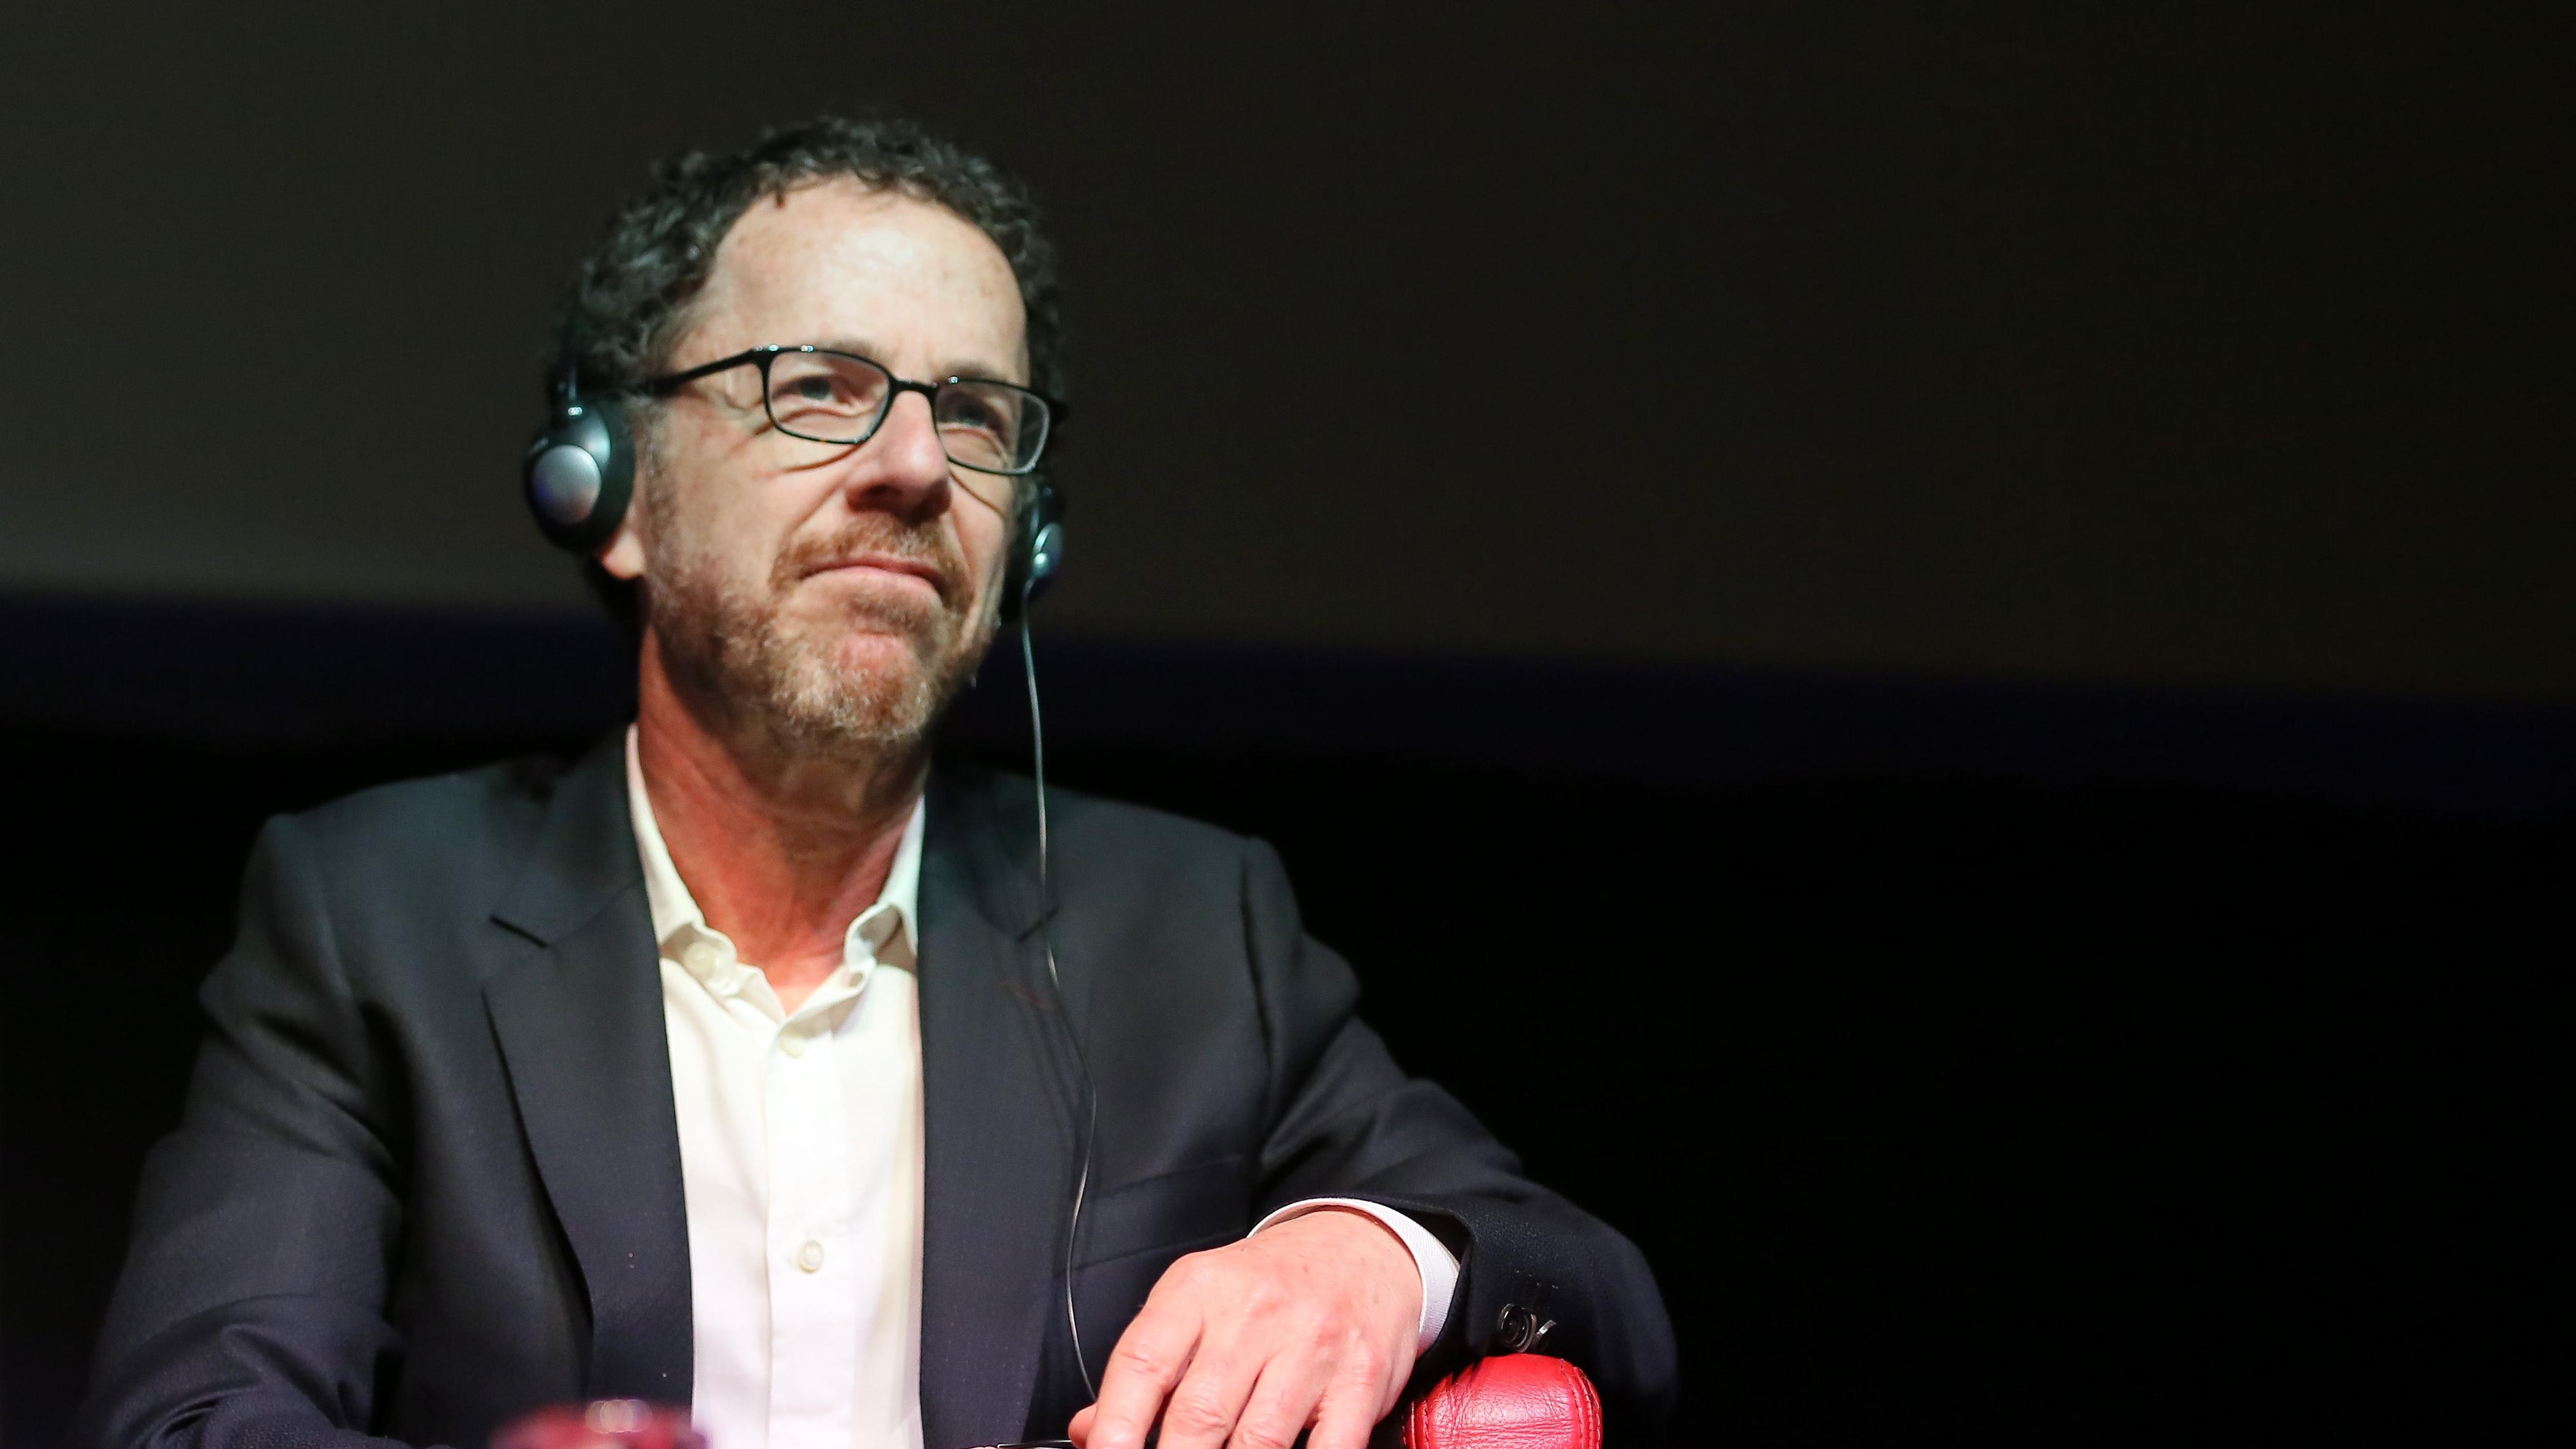 Ethan Coen seems confident that he and his brother will someday work together again